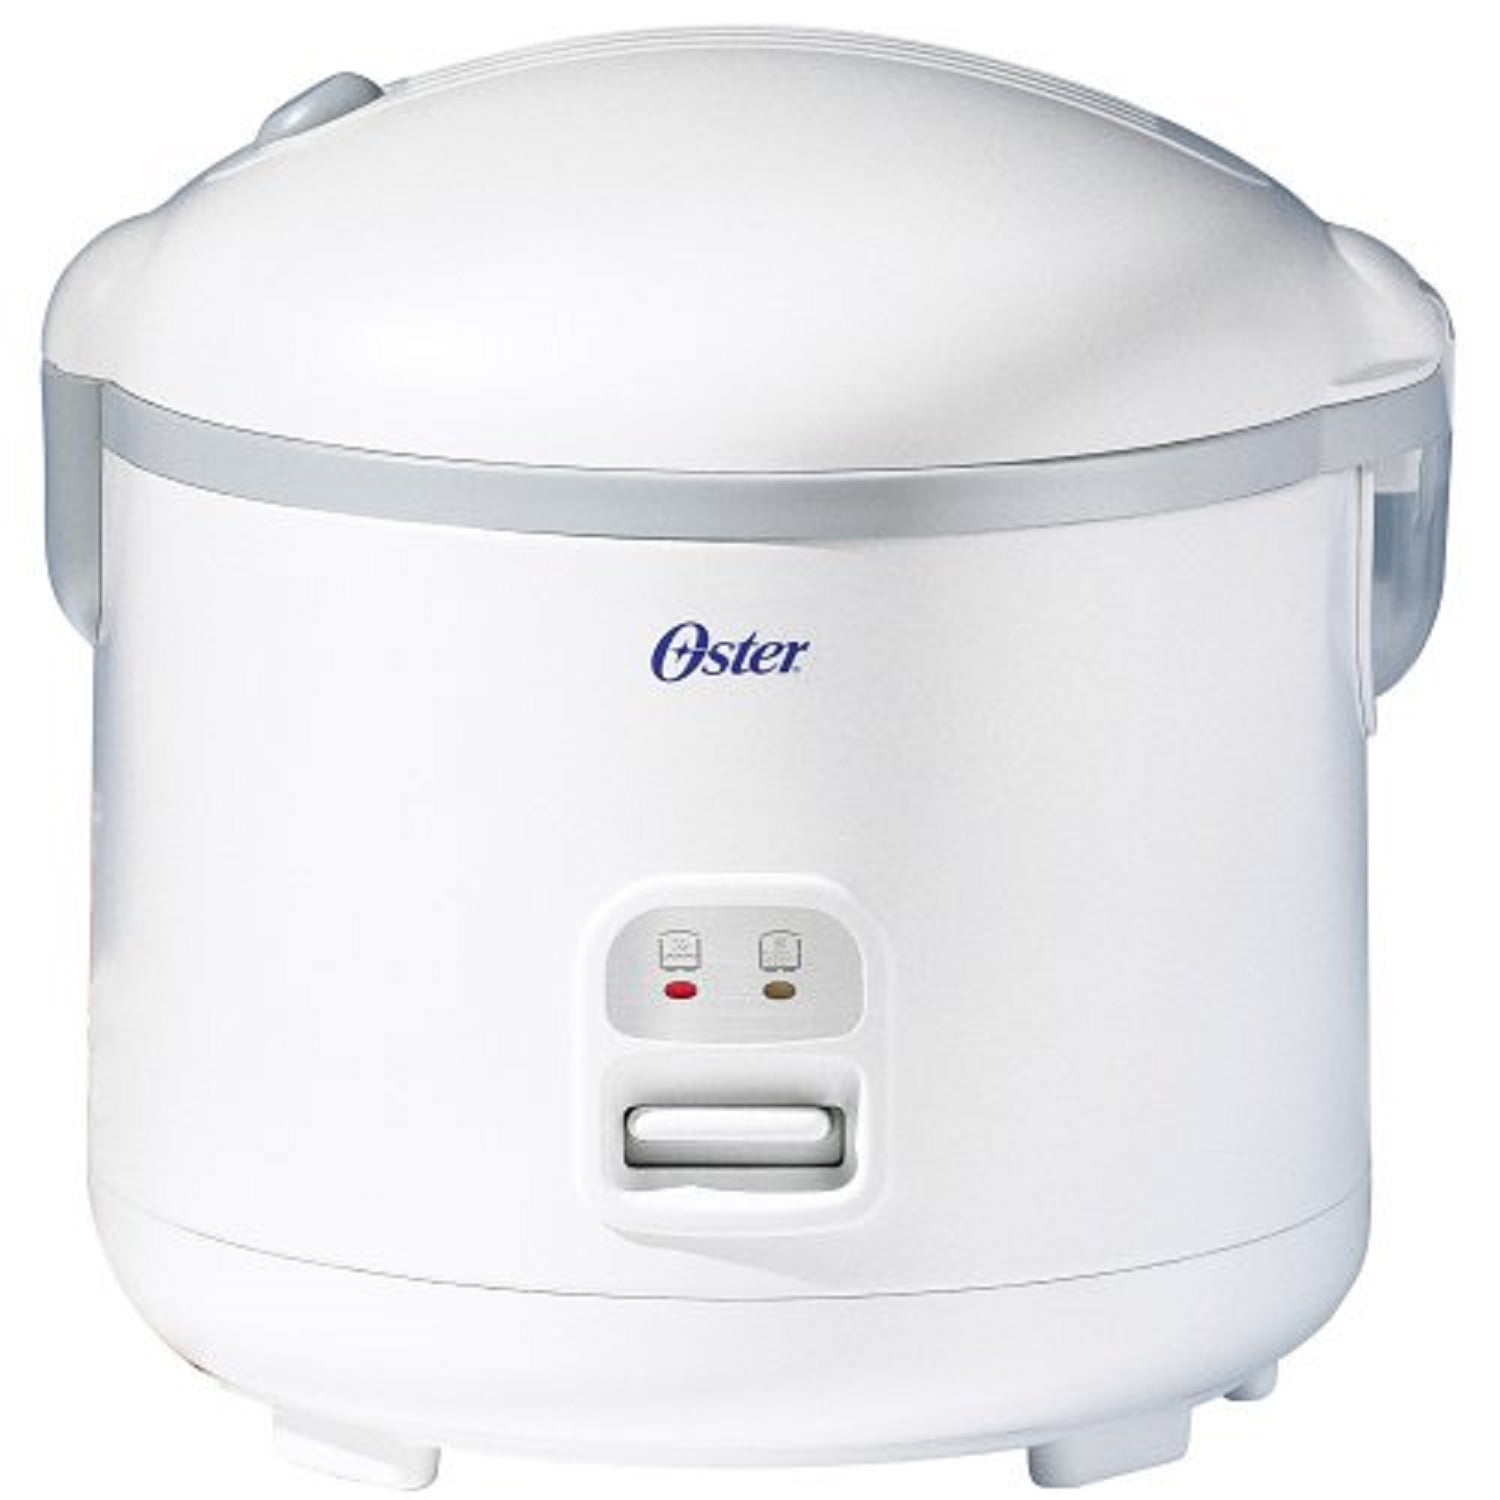 Oster 6-Cup Rice Cooker with Steam Tray, Black (CKSTRCMS65) 